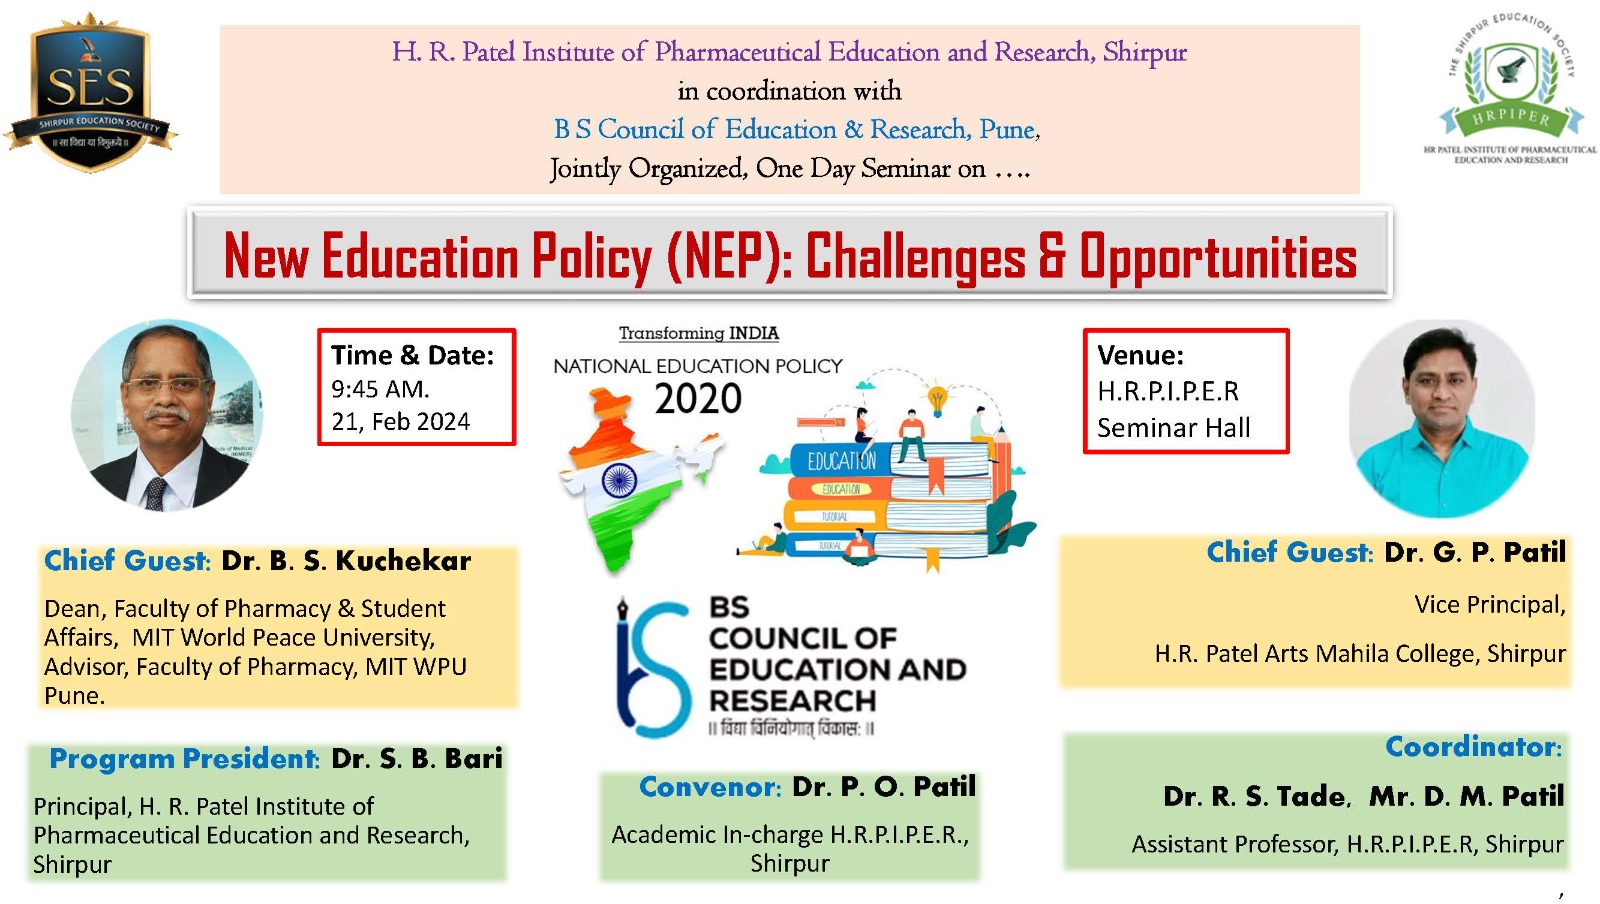 One Day Seminar on New Education Policy